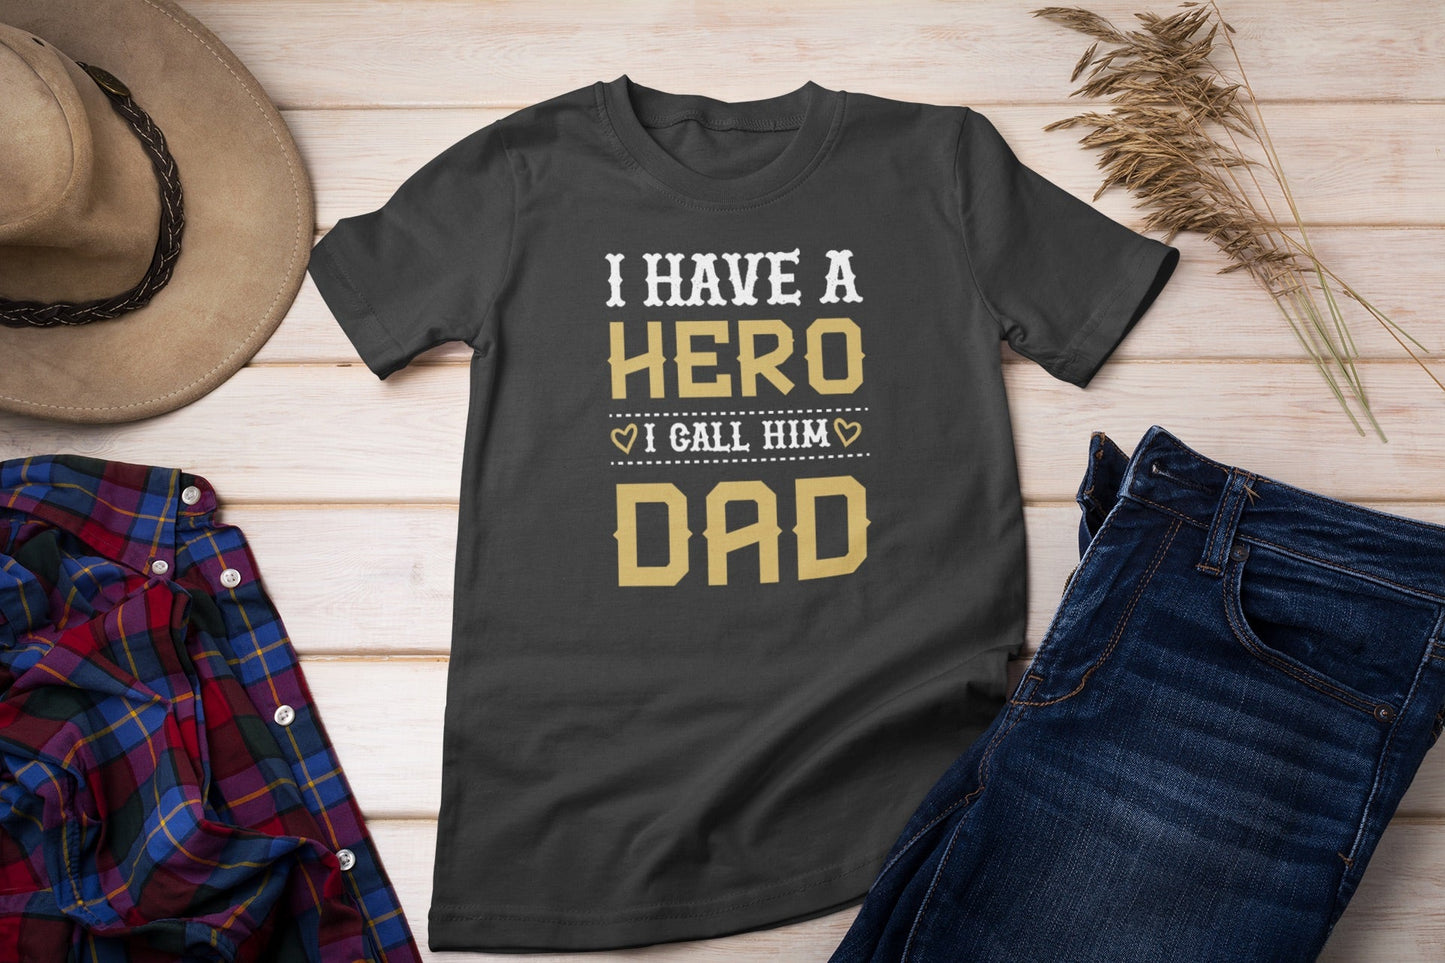 Dad is my hero T-shirt | Father's Day Gift - Three2Tango Tee's